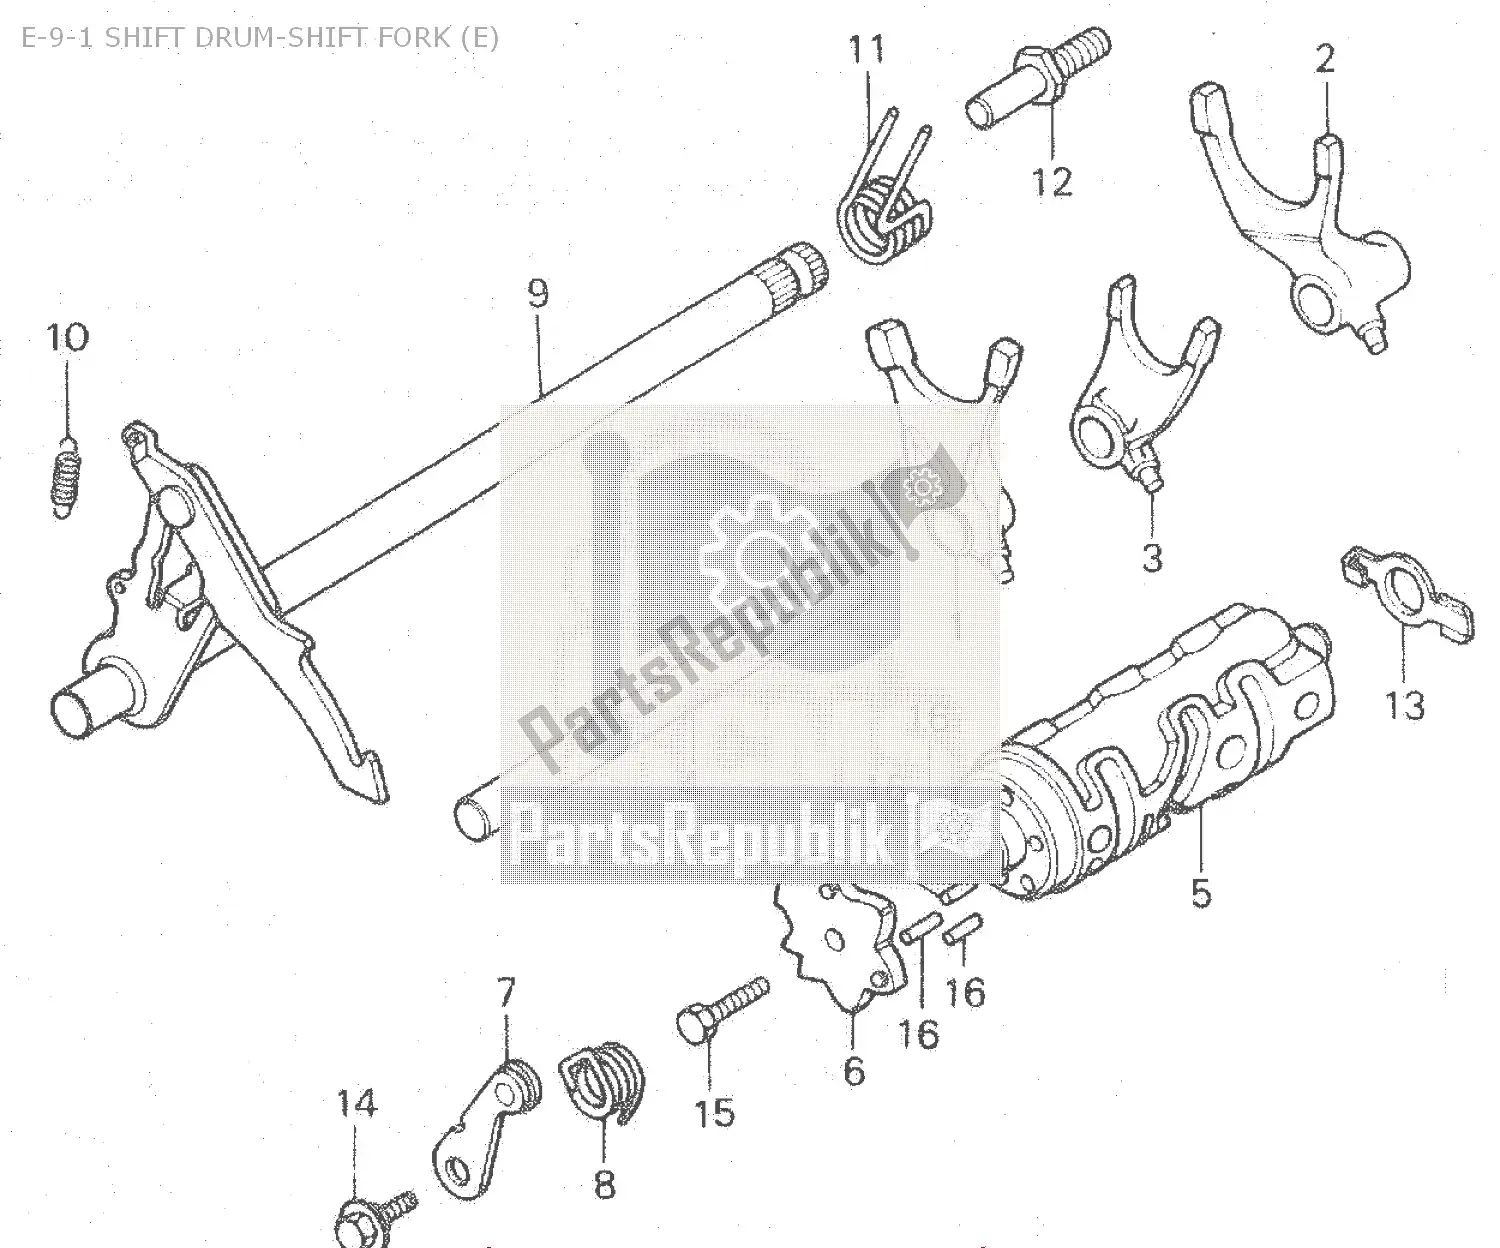 All parts for the E-9-1 Shift Drum-shift Fork (e) of the Honda MB 100 1980